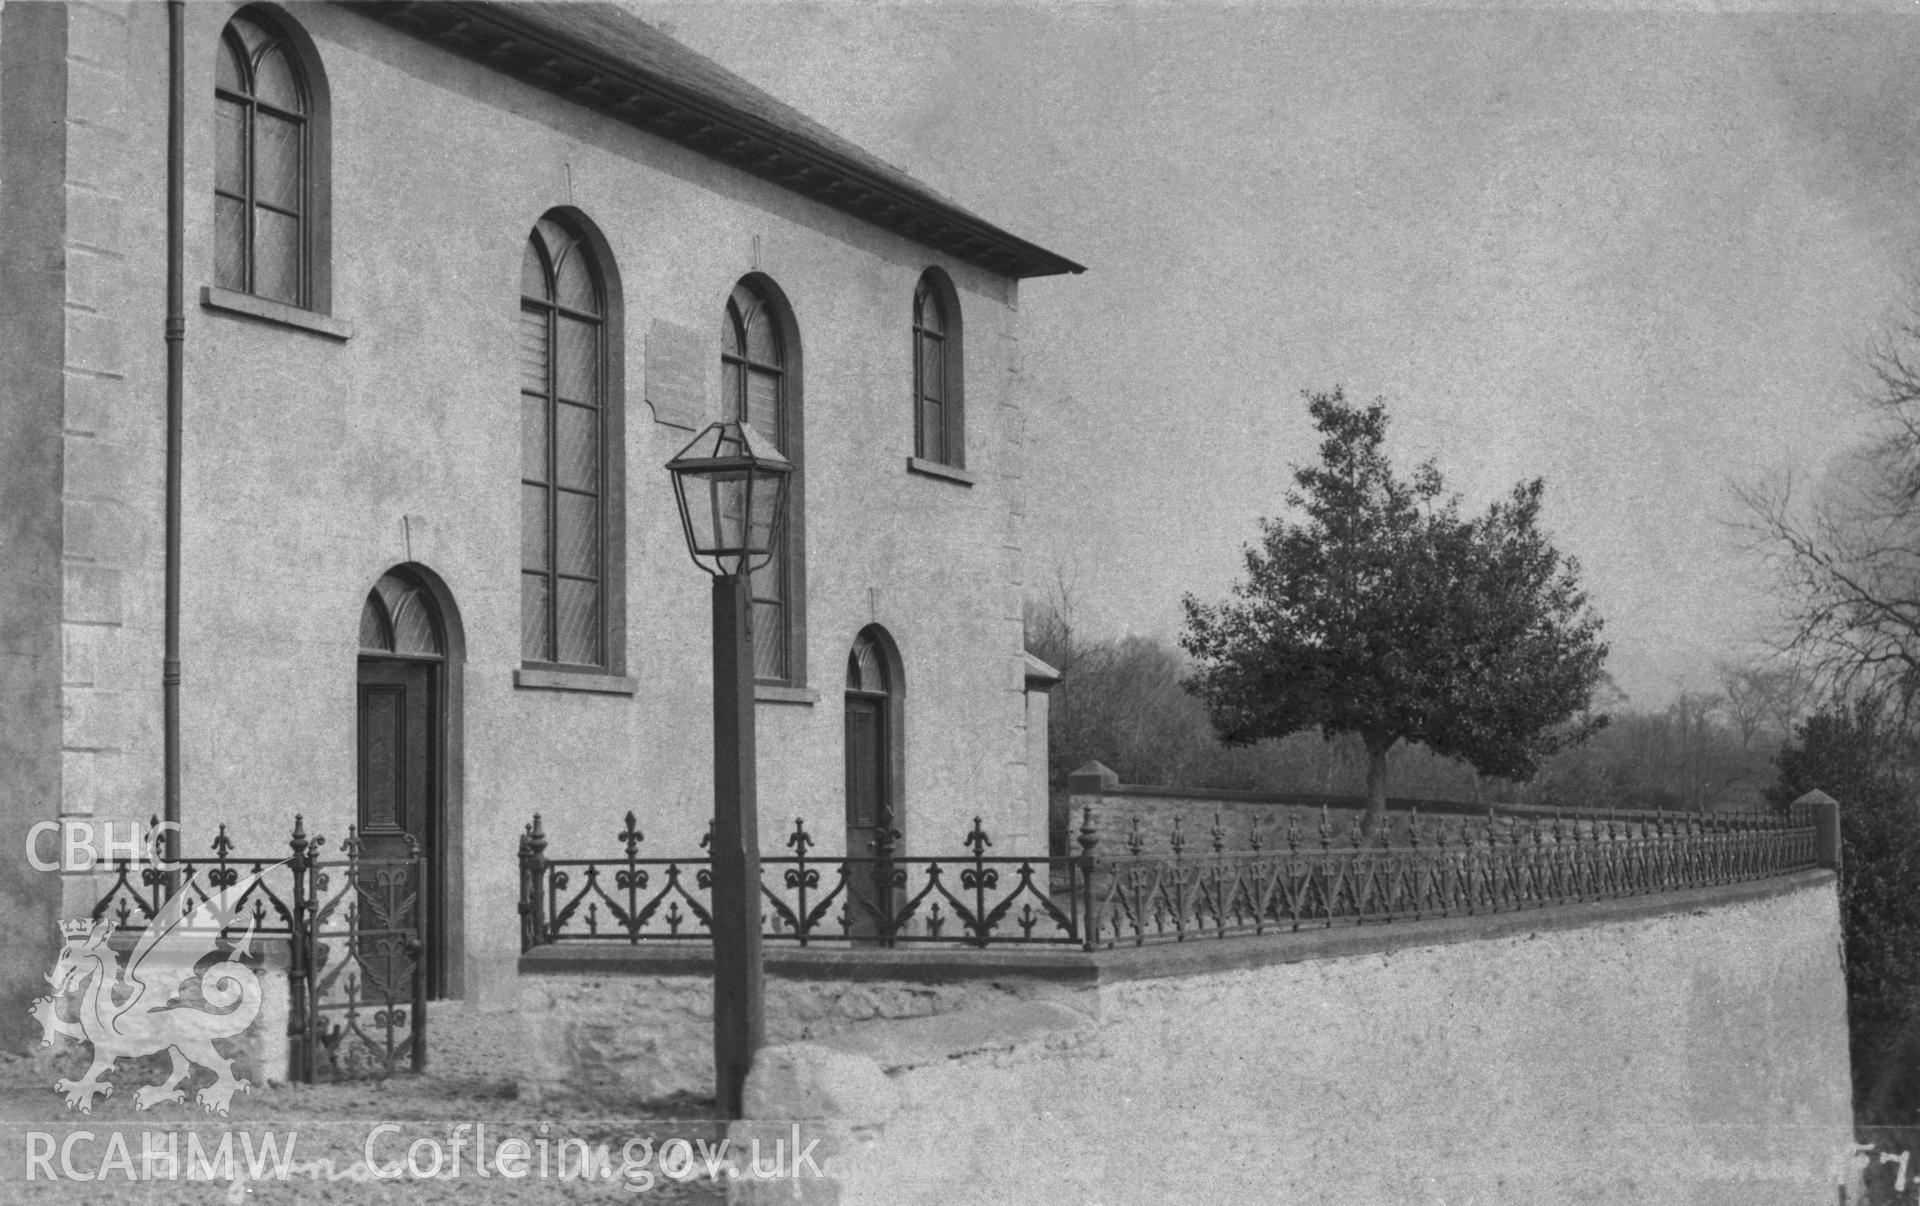 Esgairnant Chapel, Caio;  B&W print copied from an undated postcard loaned for copying by Thomas Lloyd.  Copy negative held.